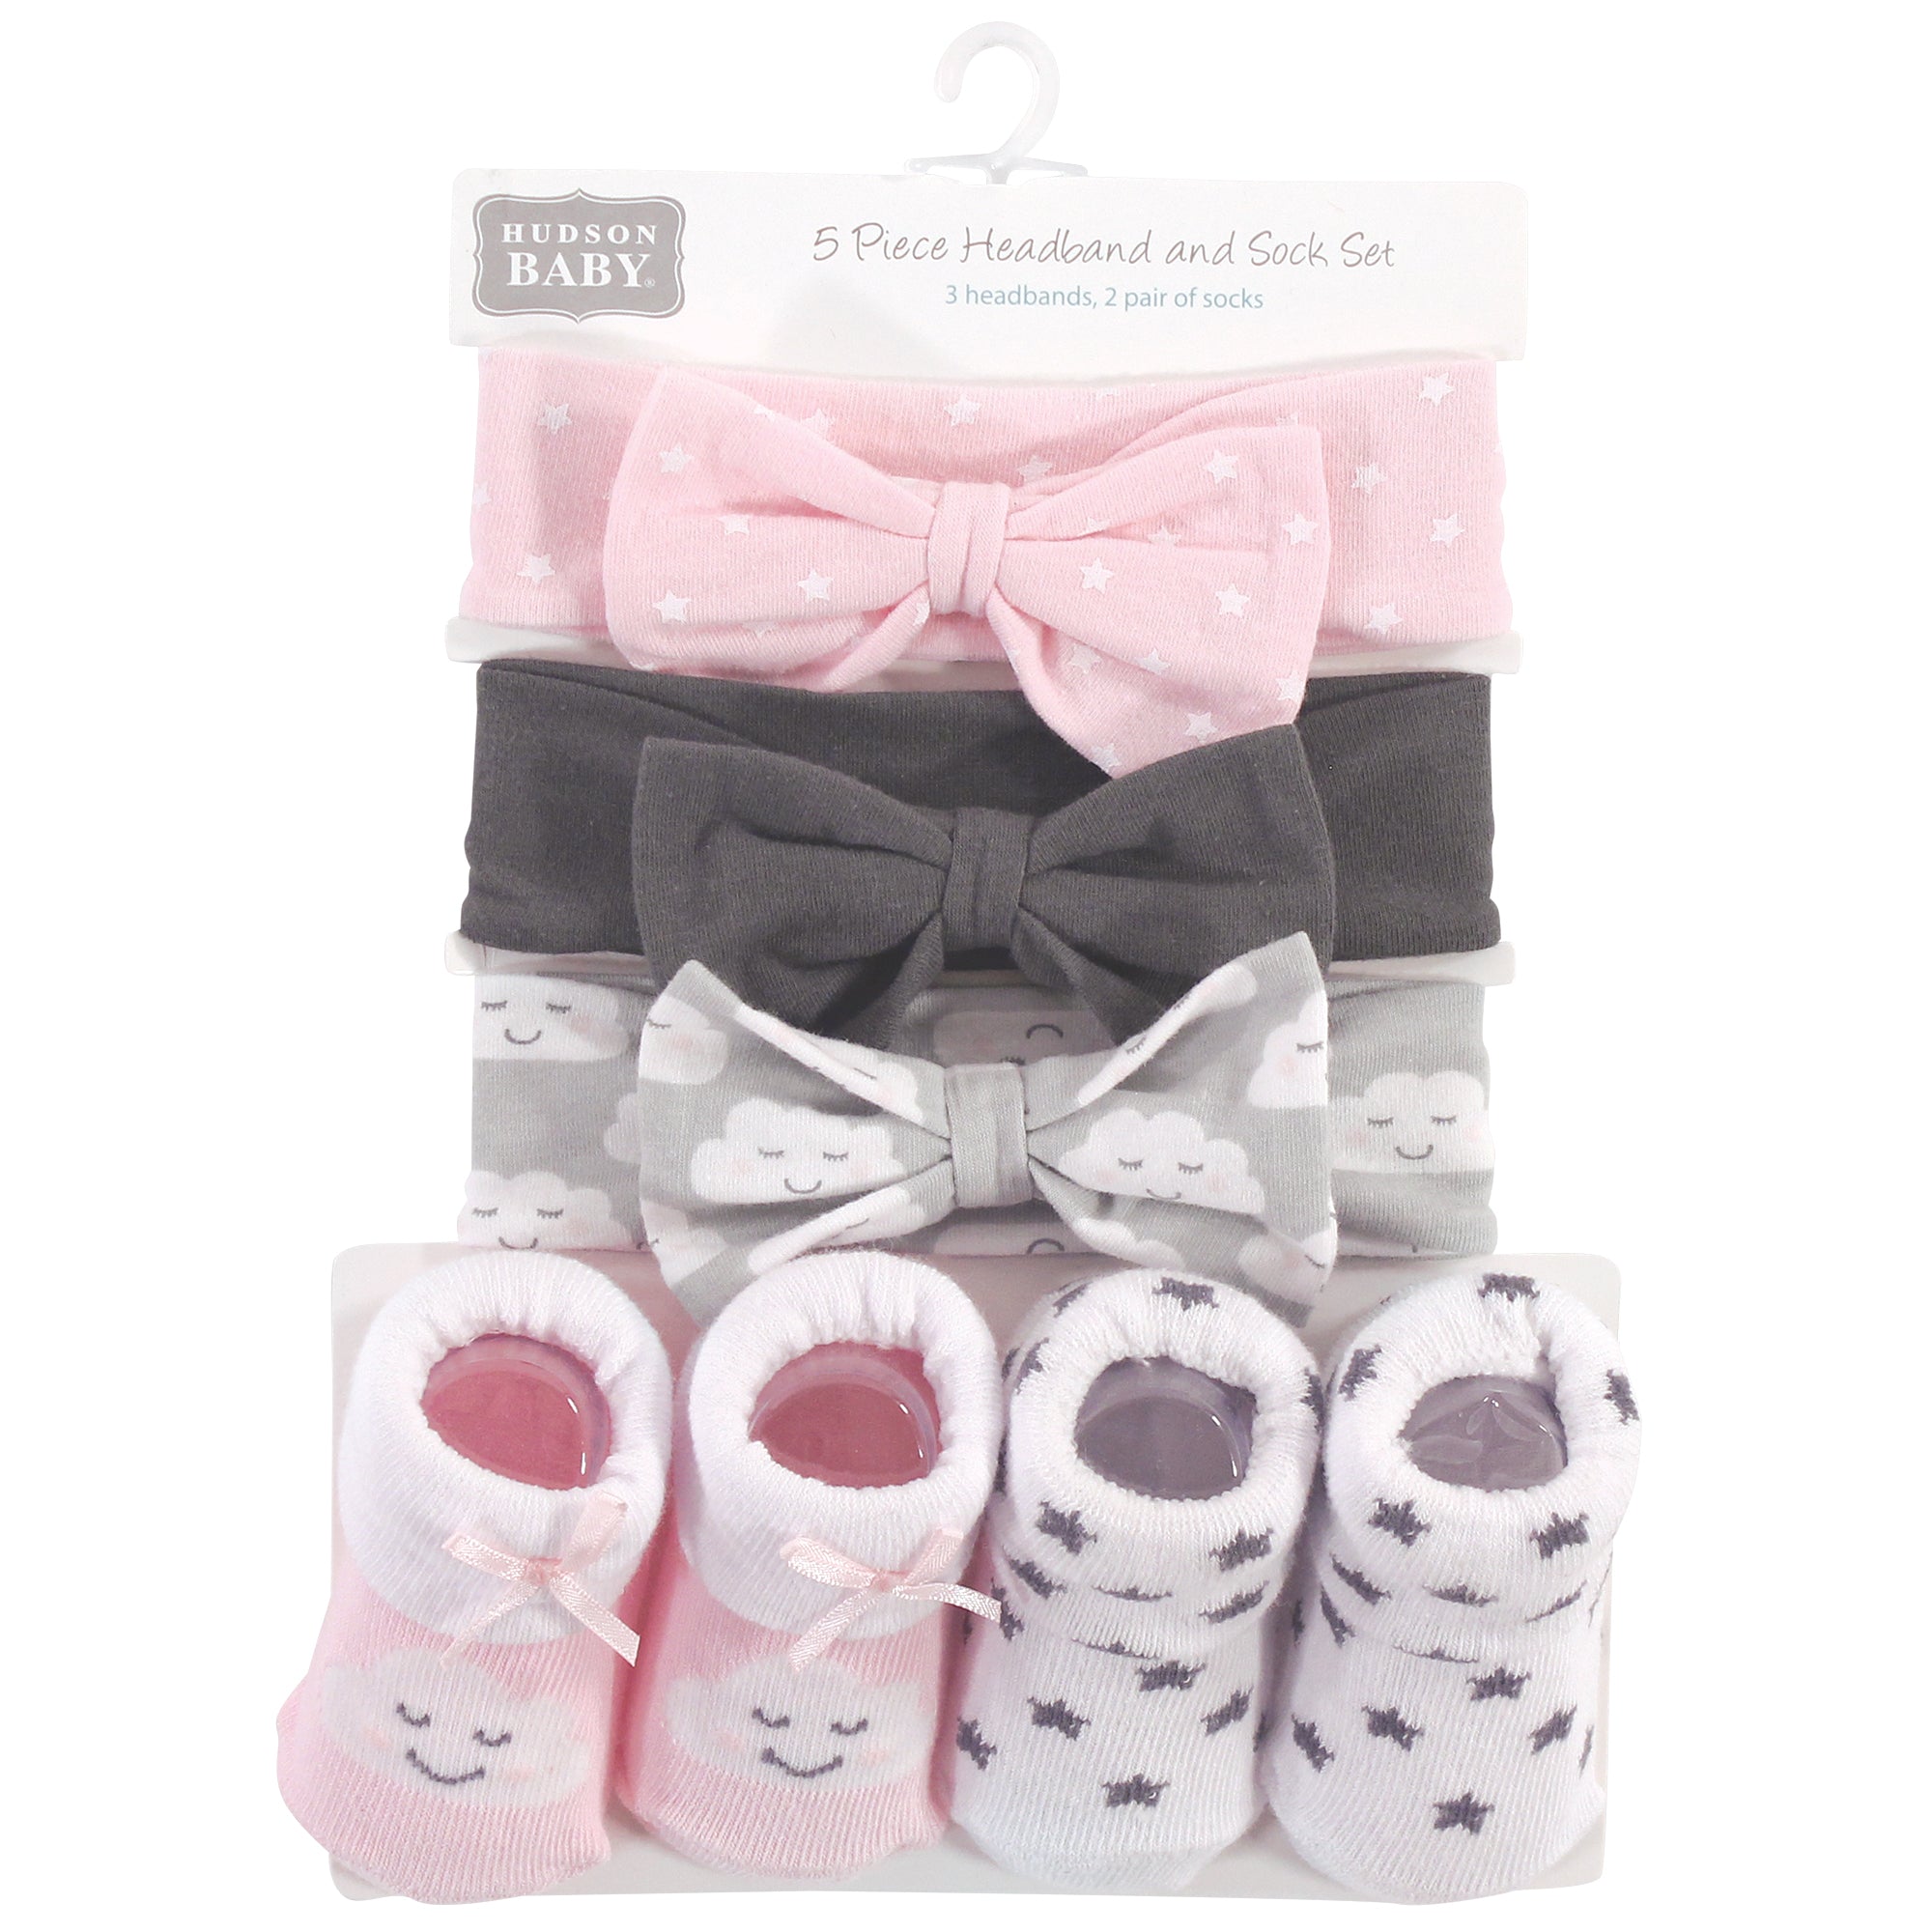 Imported Baby 5 piece headband and socks booties set for 0-9 months